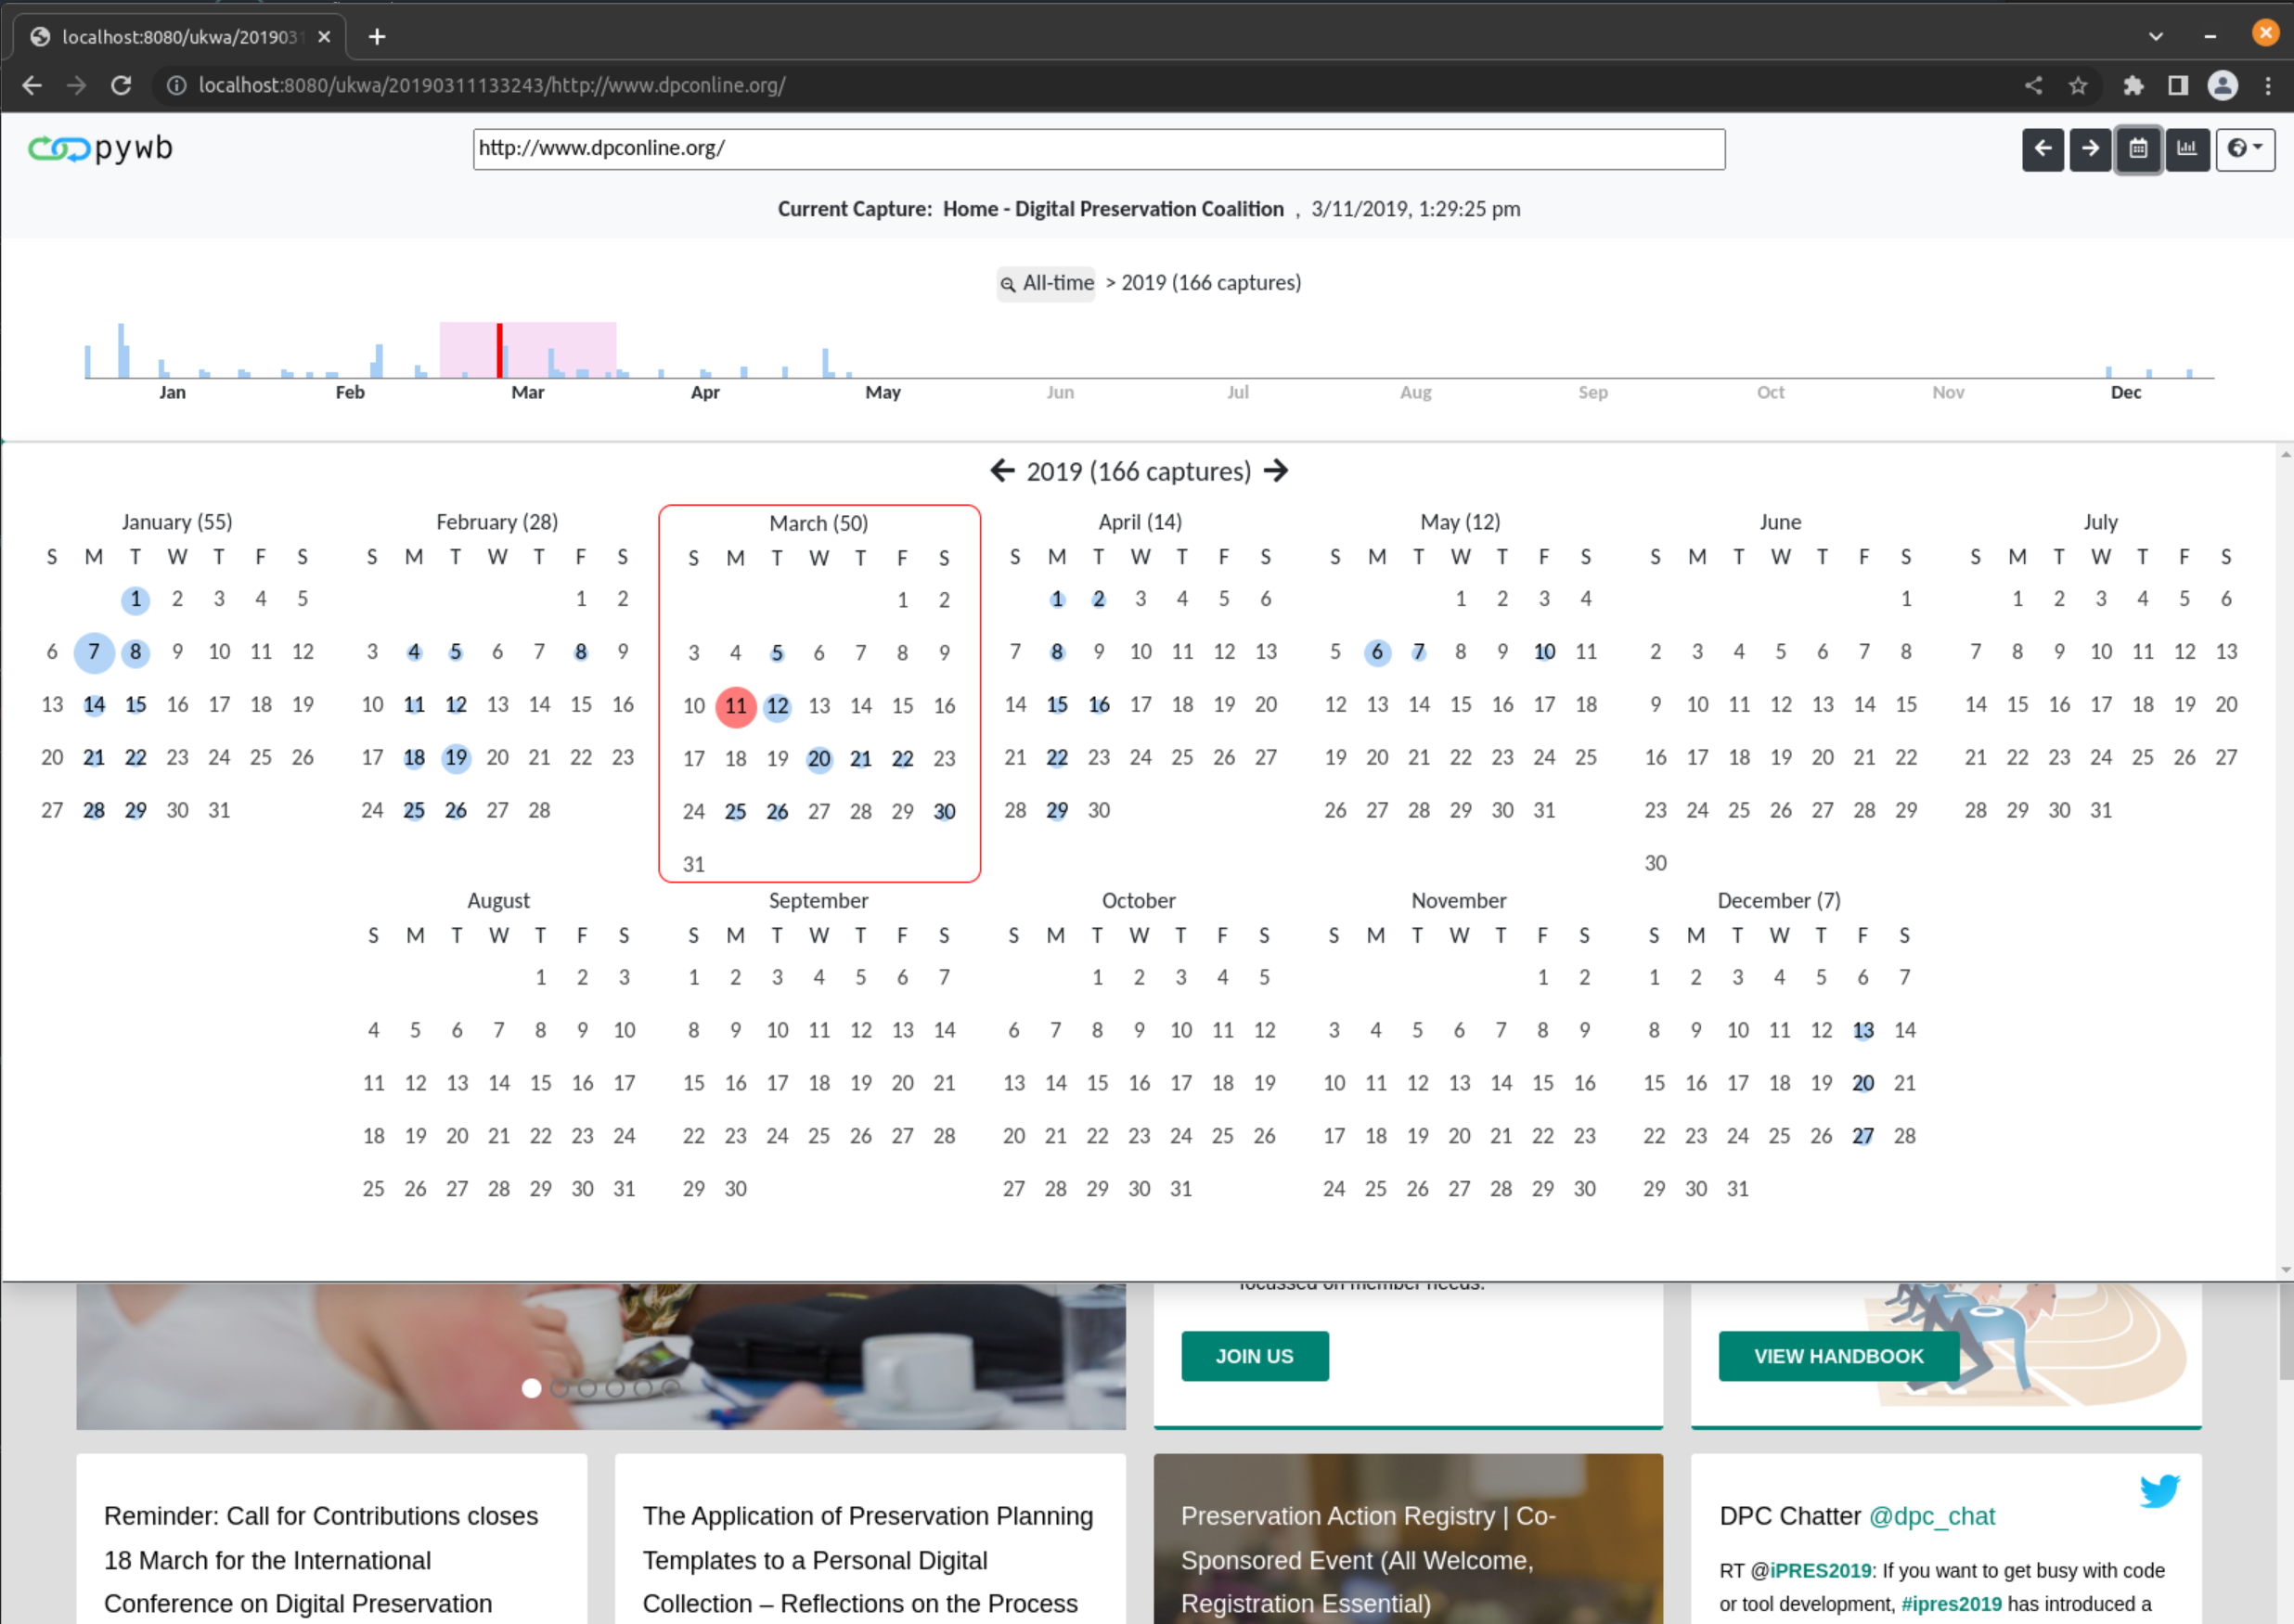 Screenshot of pywb 2.7 banner seen over a capture of dpconline.org with the timeline and calendar visible